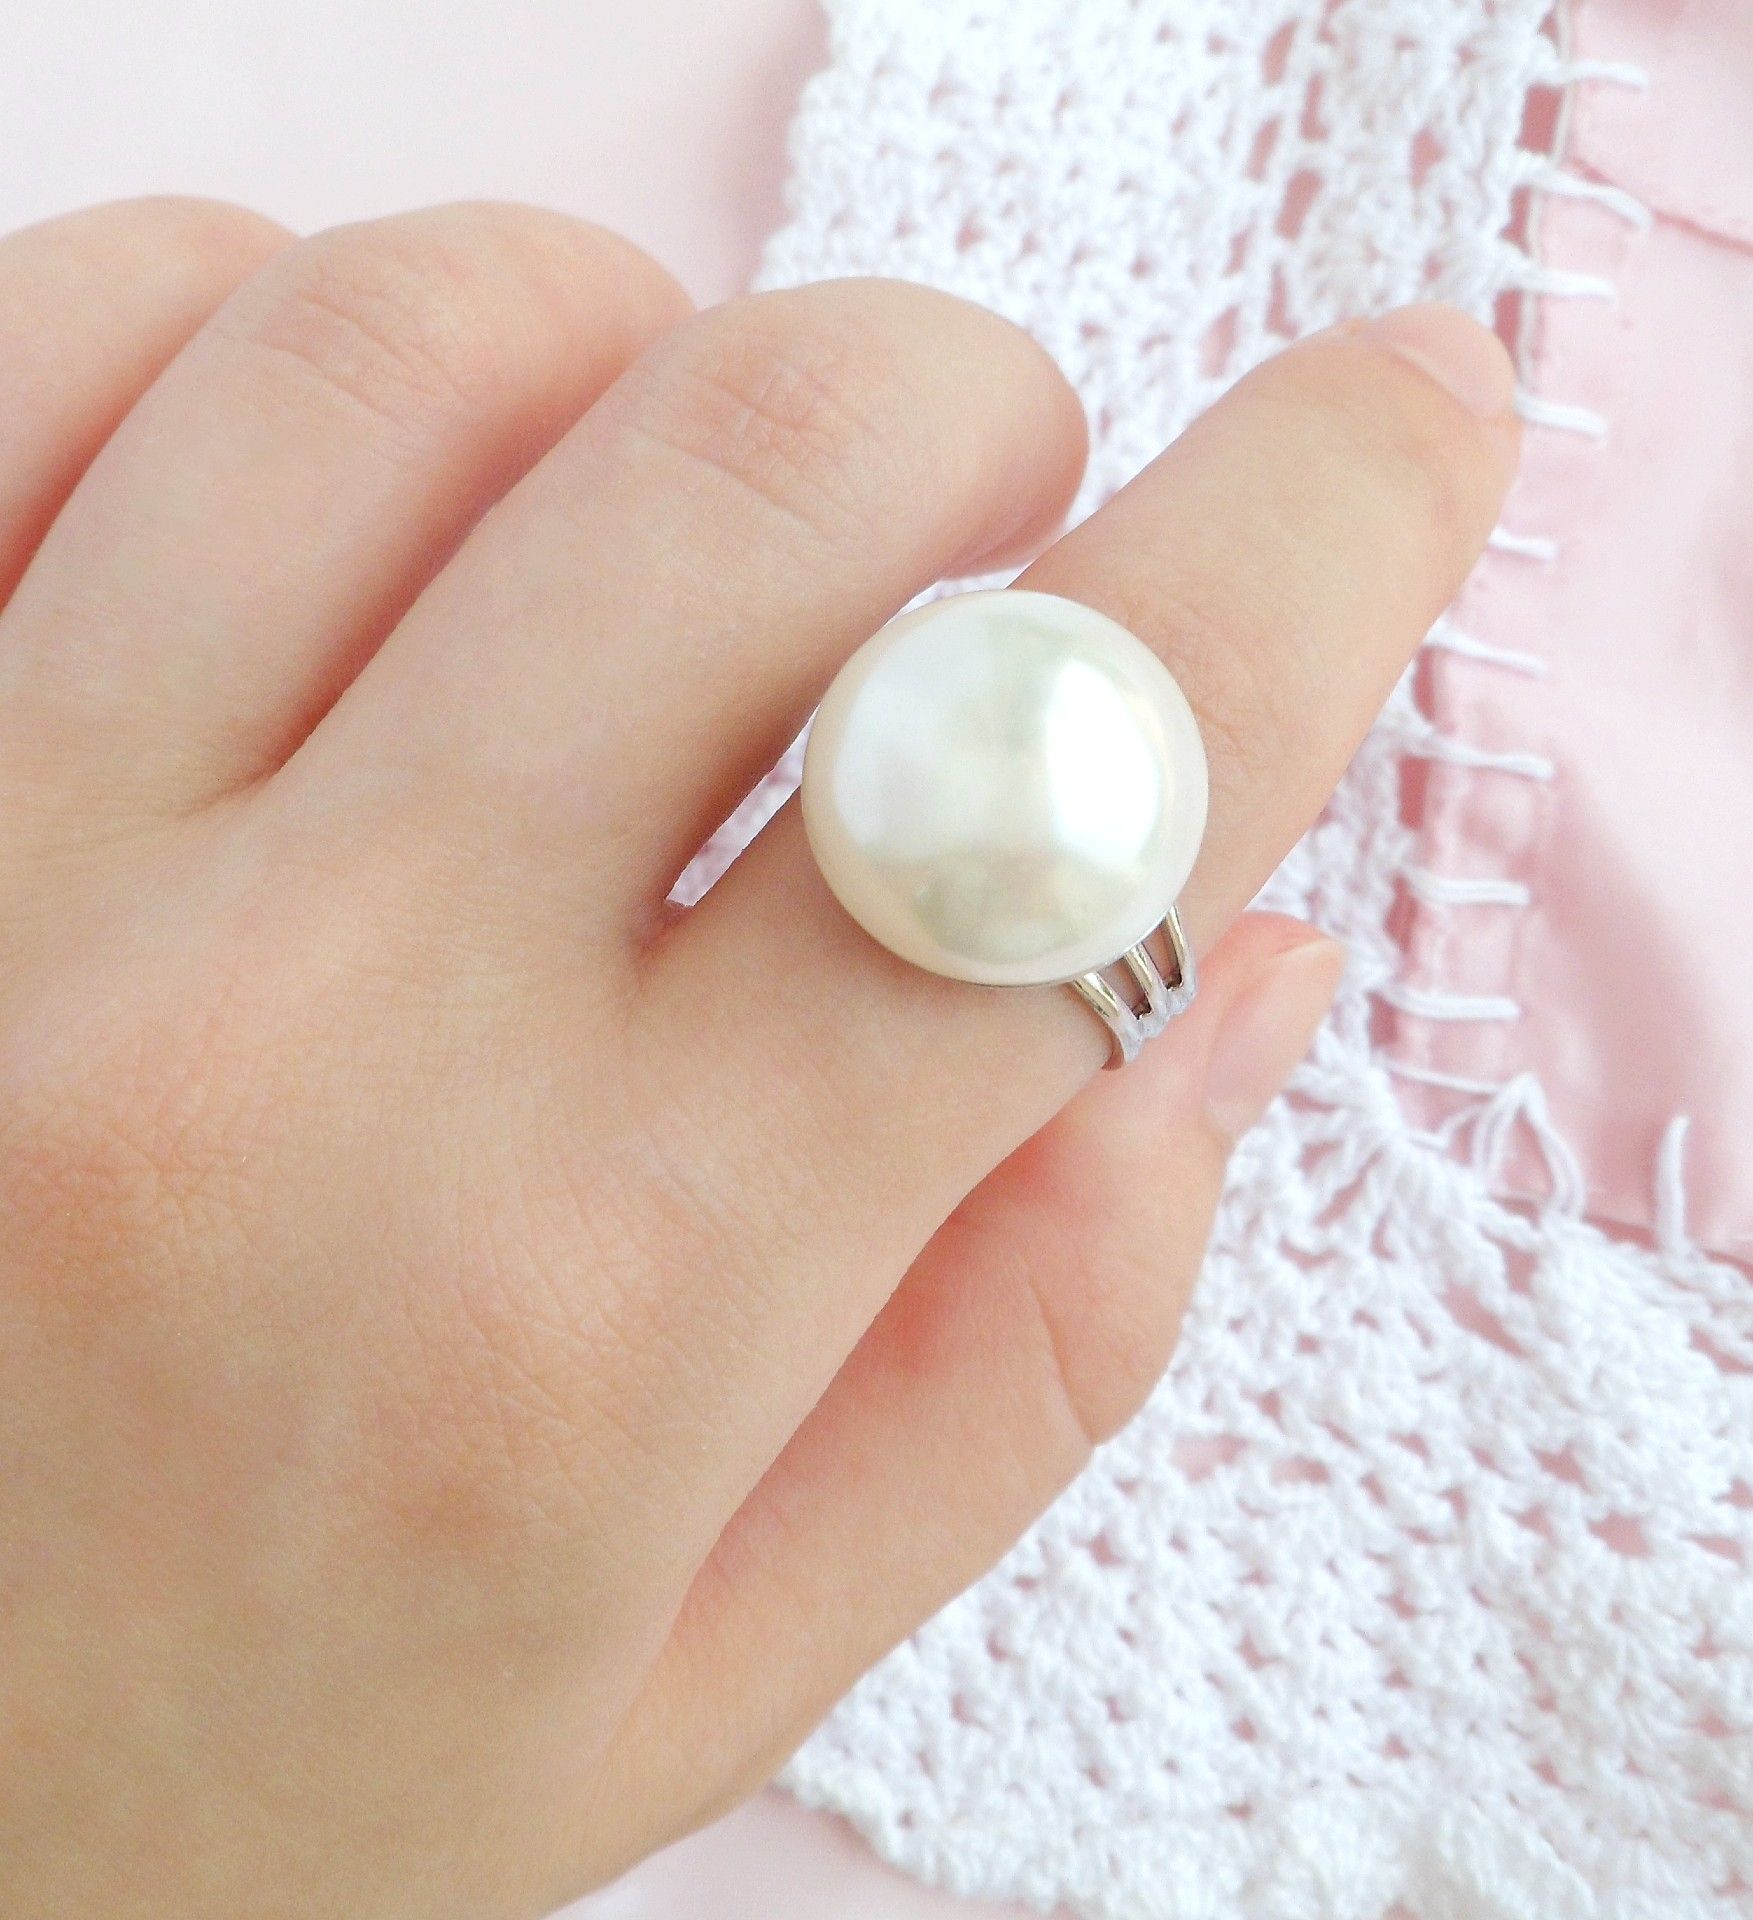 Amazon.com: Pearl ring, silver pearl ring, white pearl ring, sterling silver  ring, tiny ring, unique ring with pearls, silver ring for women  (white-gold, 5.5) : Handmade Products